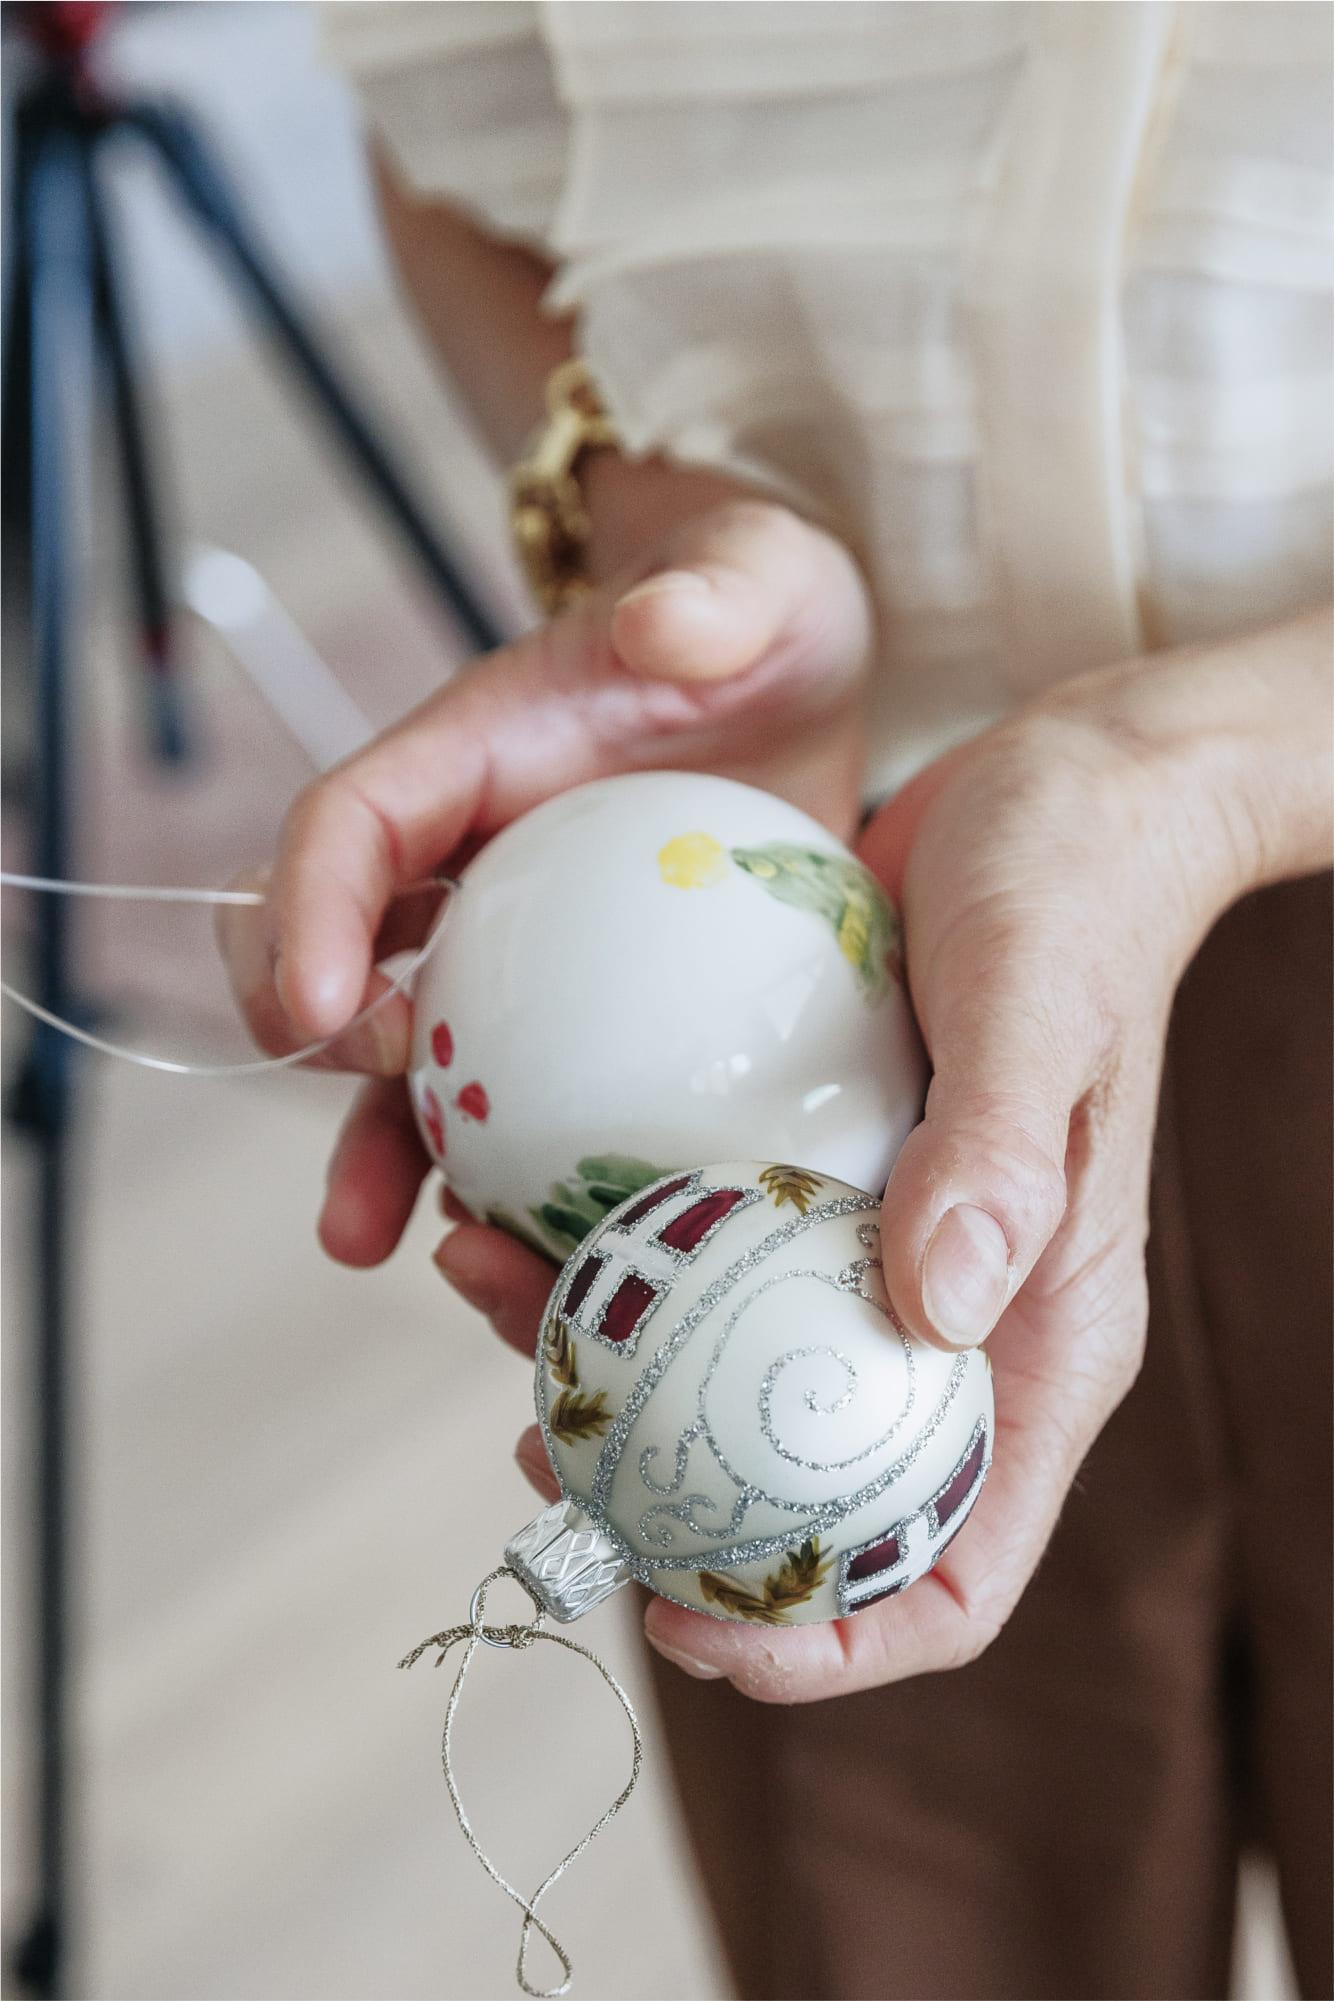 Christina Fedders holding two Christmas ornaments